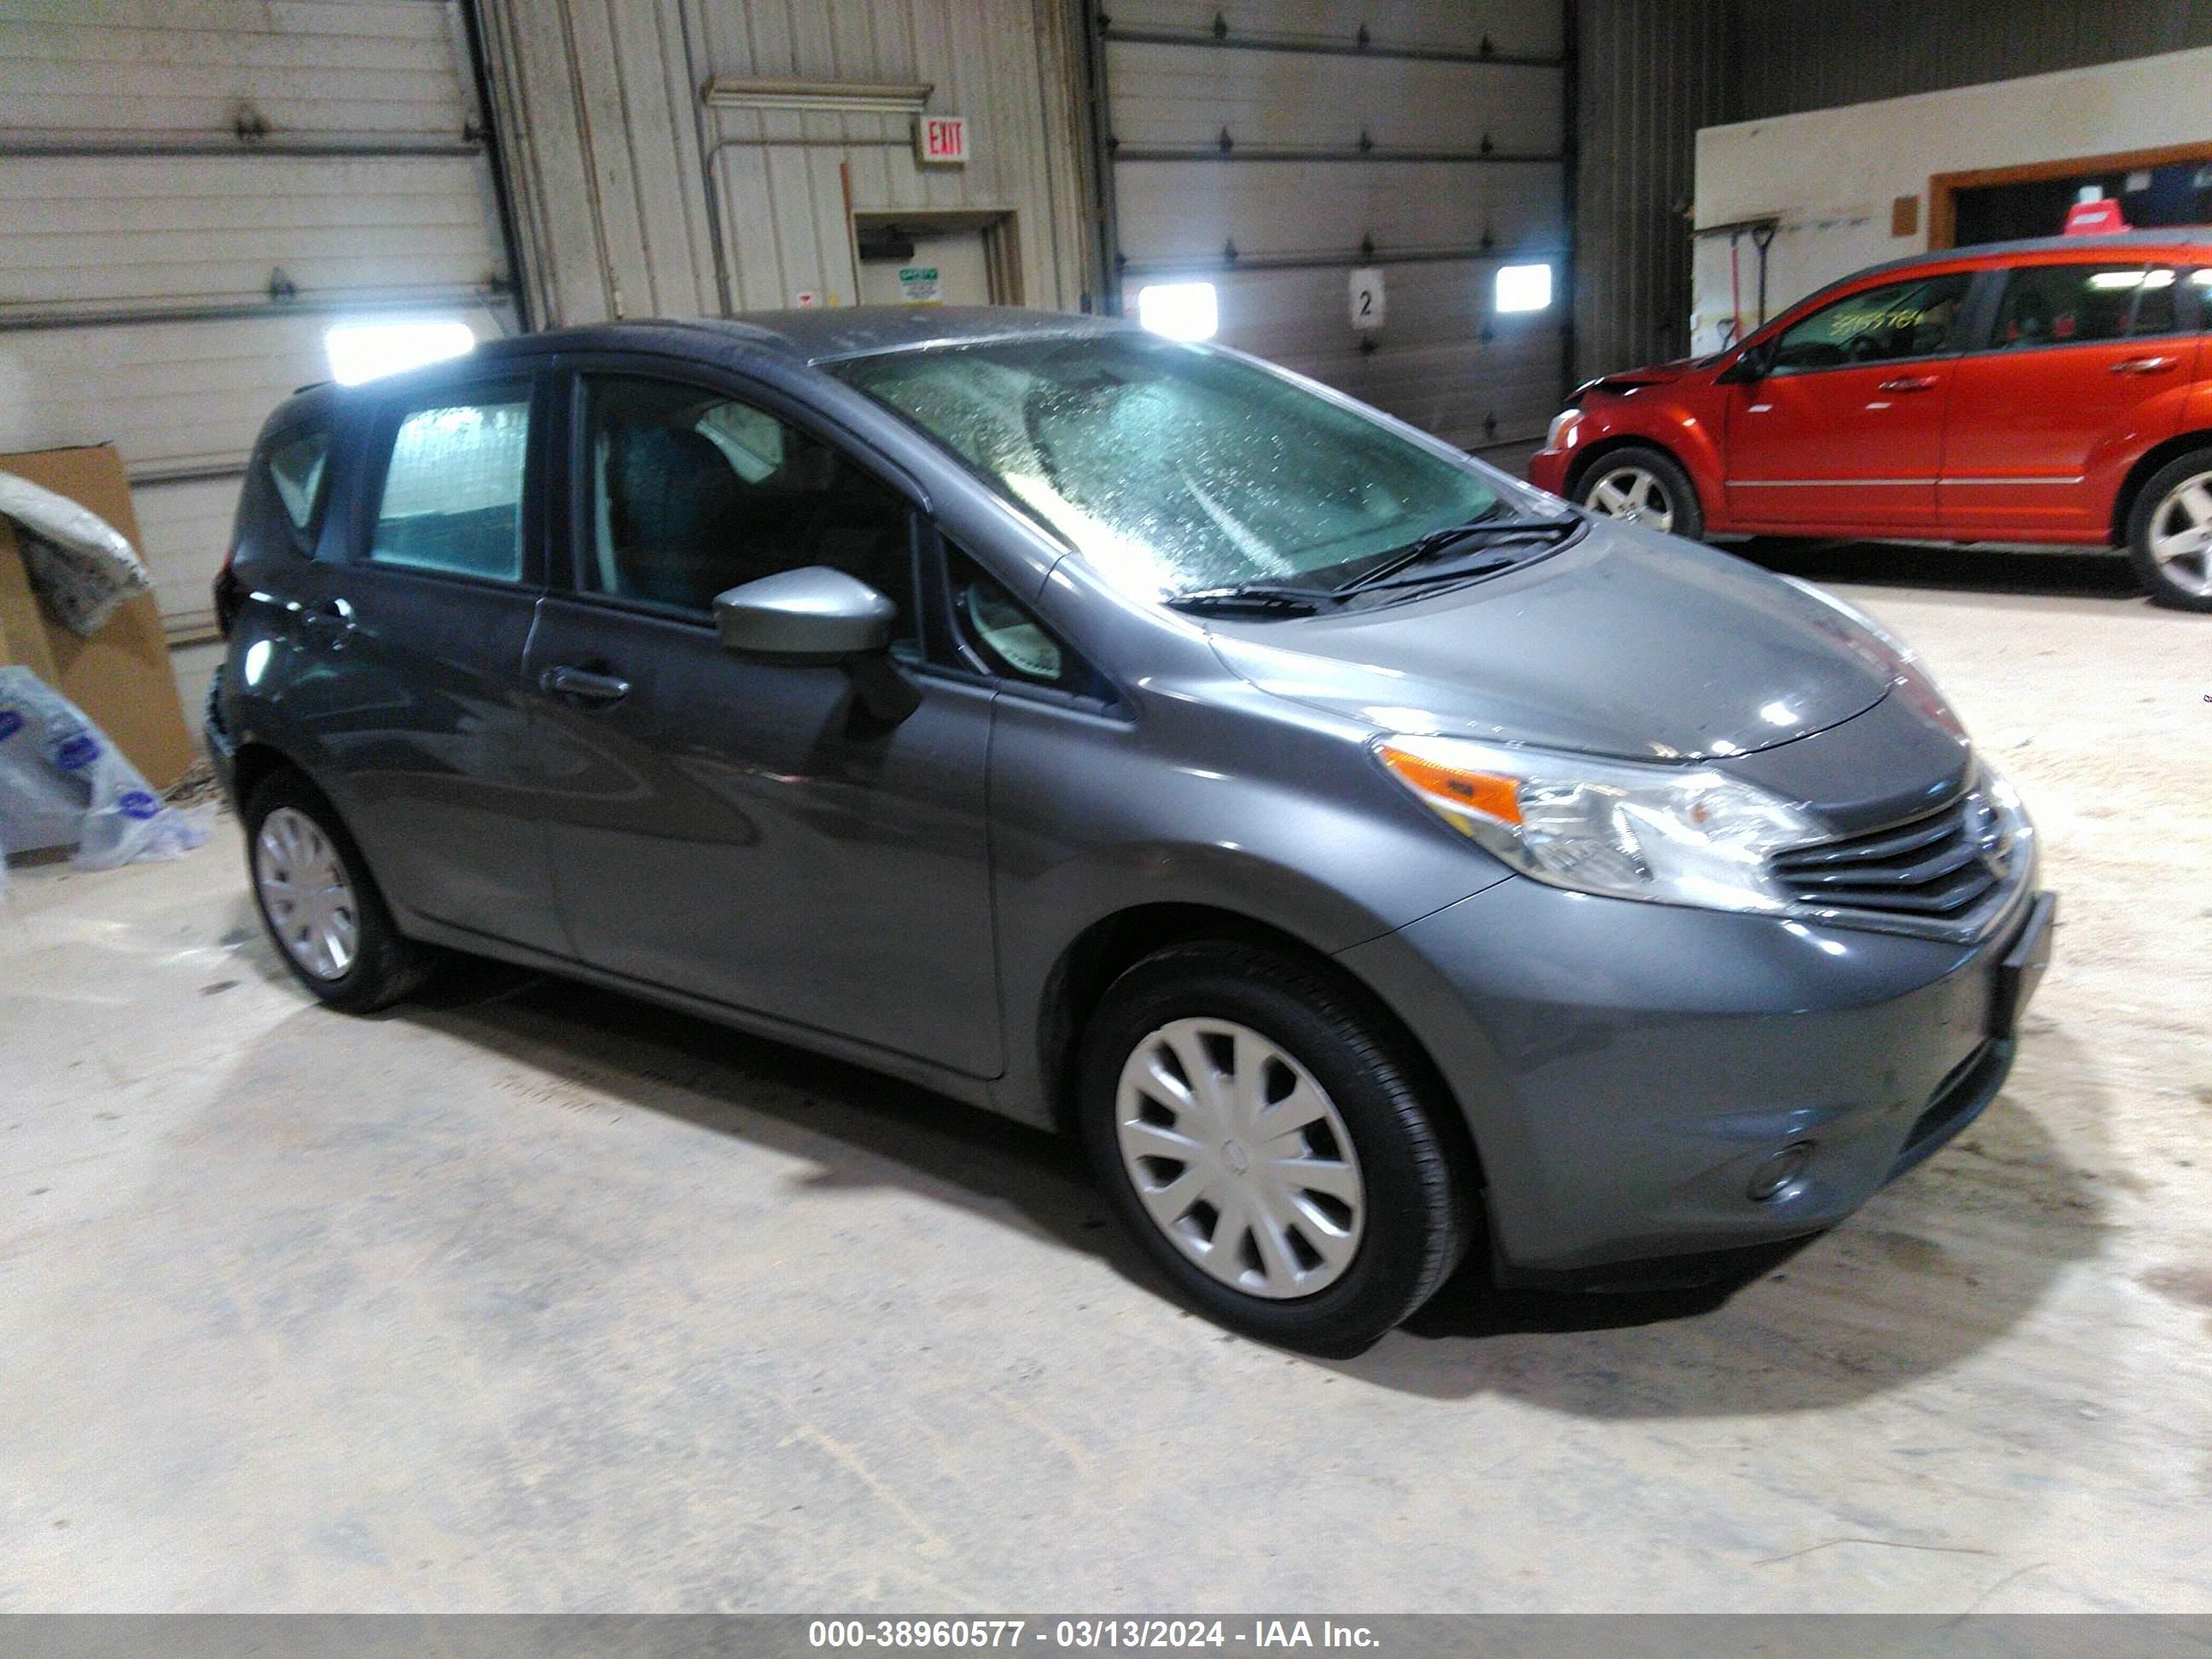 vin: 3N1CE2CP4GL405328 3N1CE2CP4GL405328 2016 nissan versa 1600 for Sale in 53901, W10321 State Road 16, Portage, USA